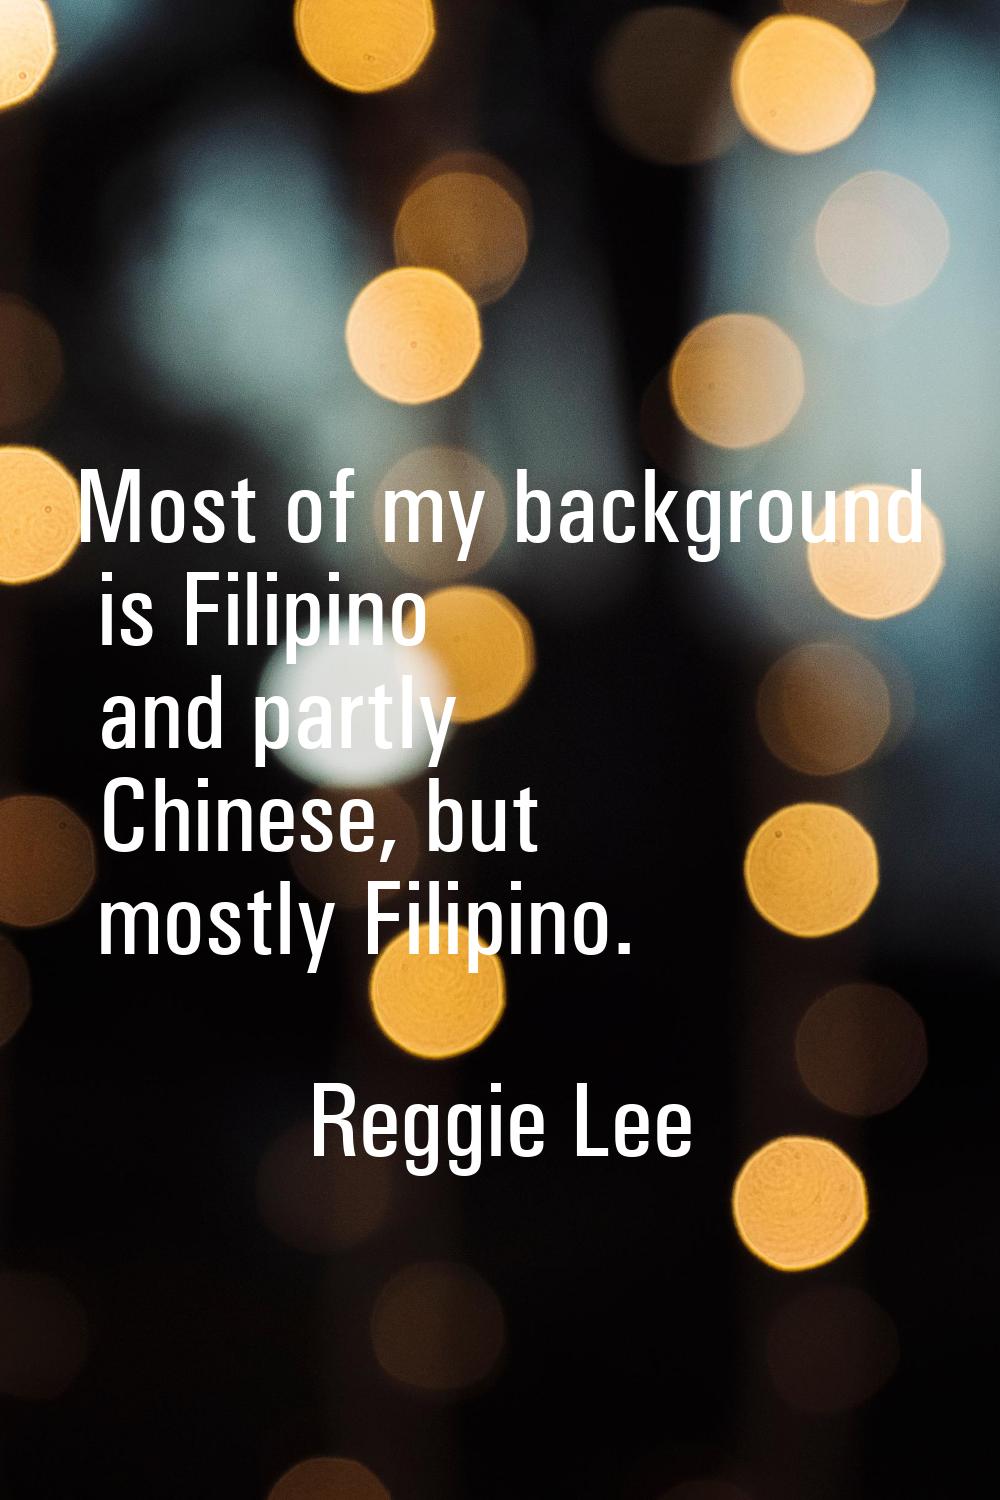 Most of my background is Filipino and partly Chinese, but mostly Filipino.